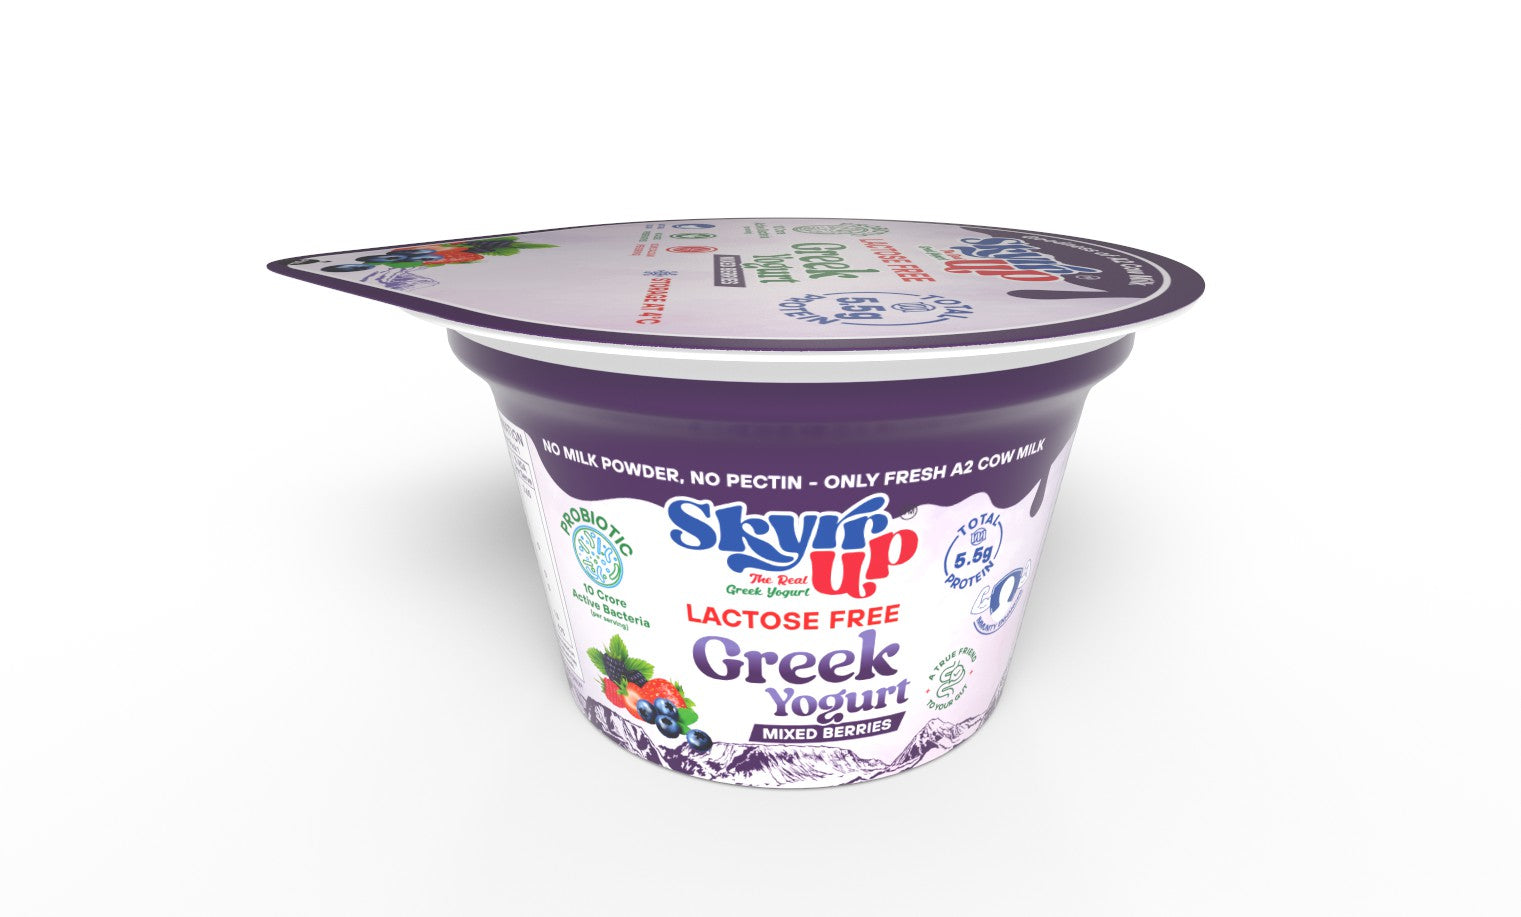 Greek Yogurt - 85gm - Mixed Berries (Made From A2 Cow Milk) - Probiotic, 5.5gm Protein, Zero Preservatives, Lactose Free- Pack 0f 6